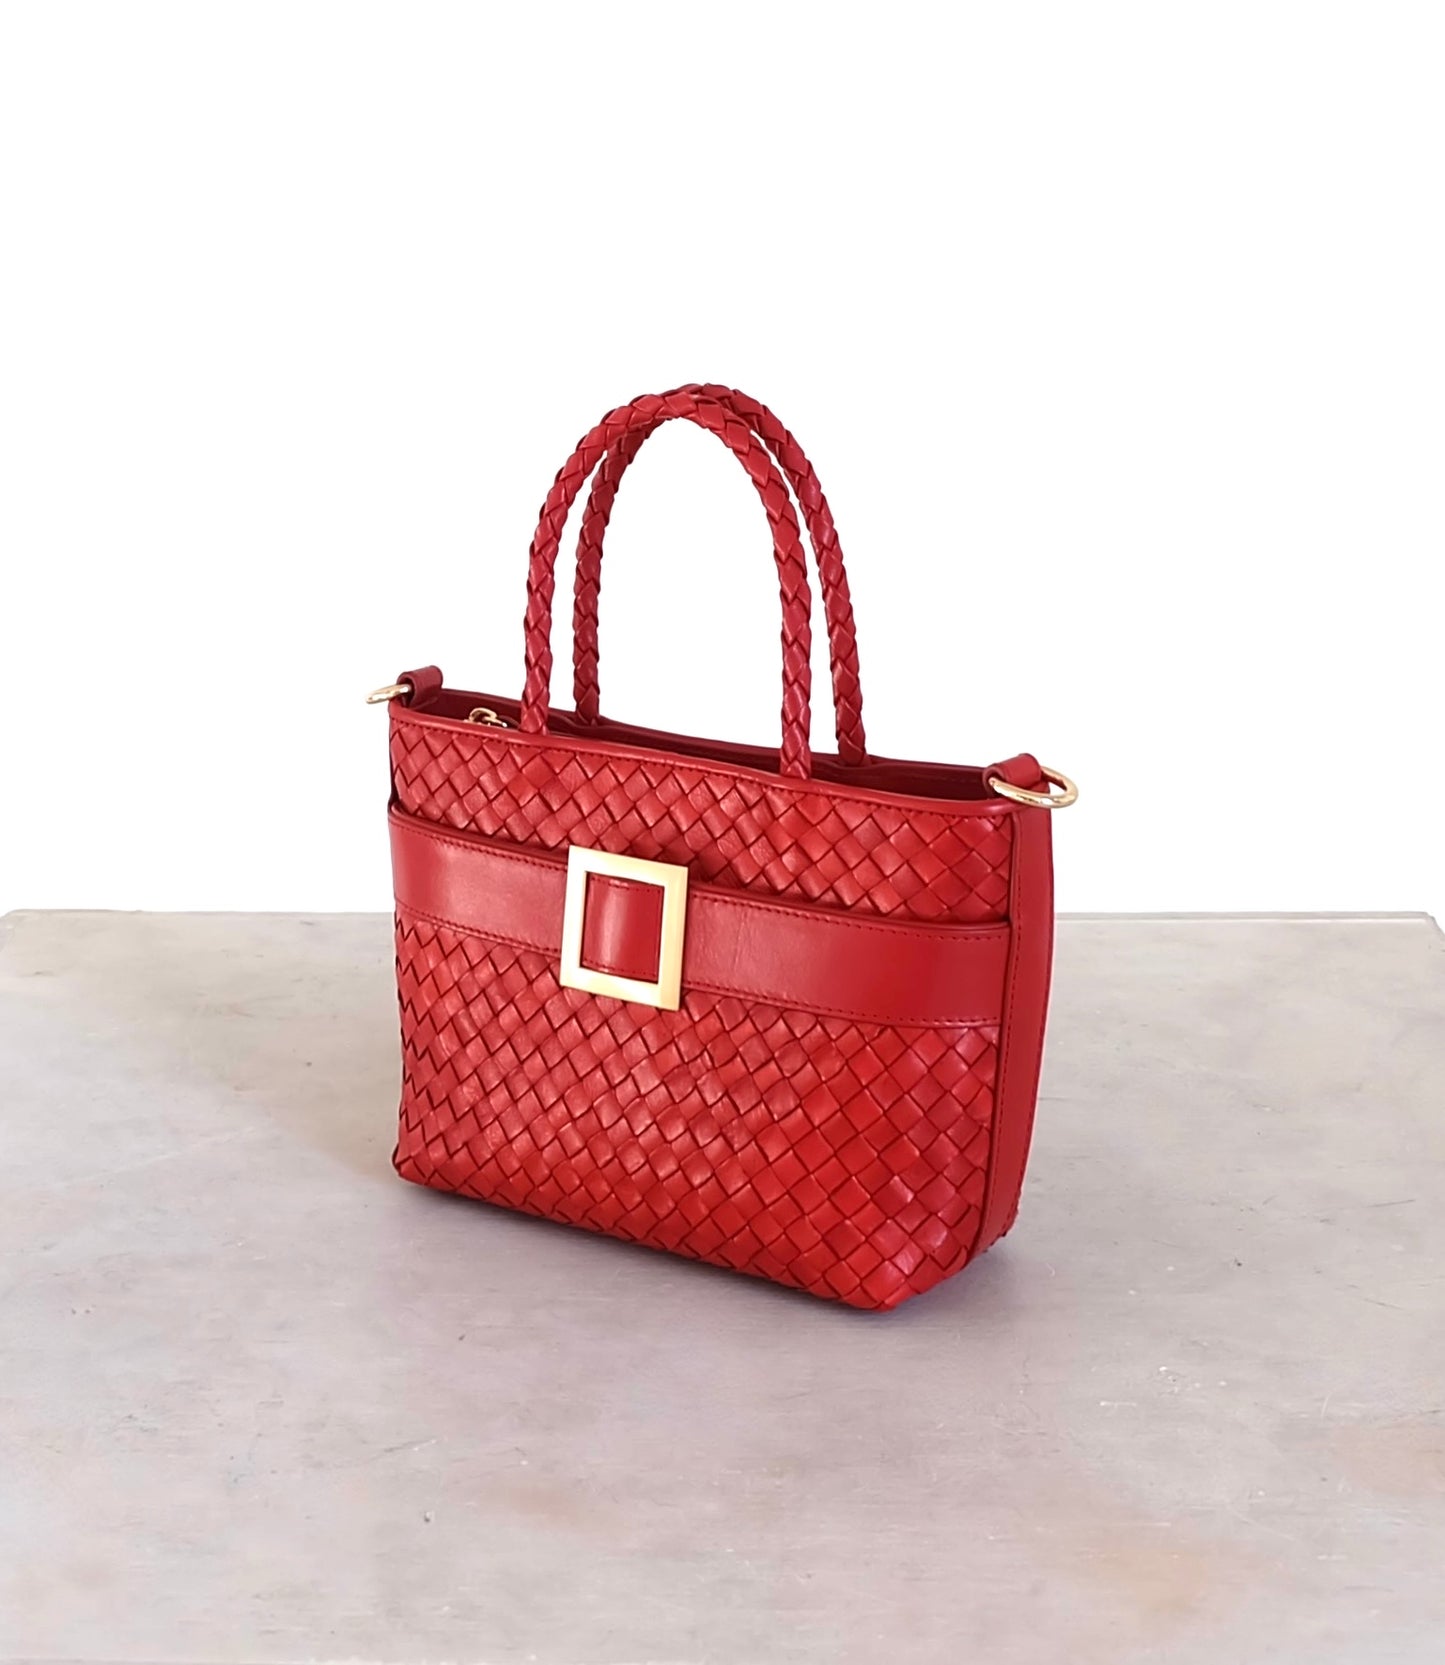 Sustainable Italian leather designer handbag in chili red. Braided mini tote bag and crossbody in one, with accent buckle and front compartment.